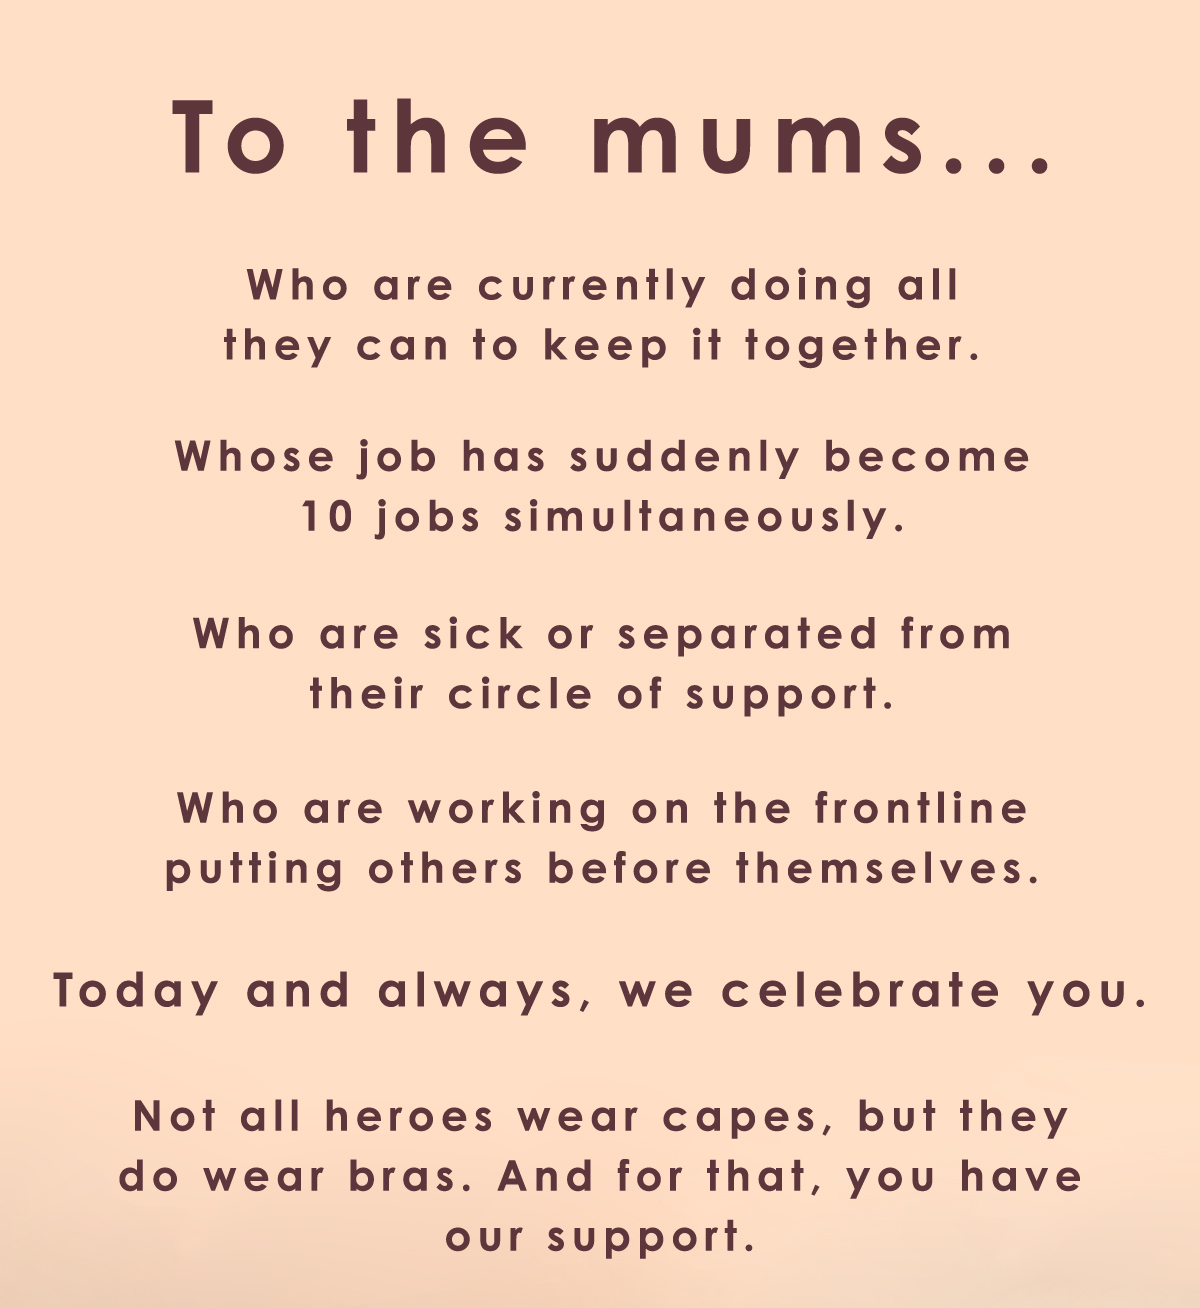 To the mums... Not all heroes wear capes, but they do wear bras. And for that, you have our support.